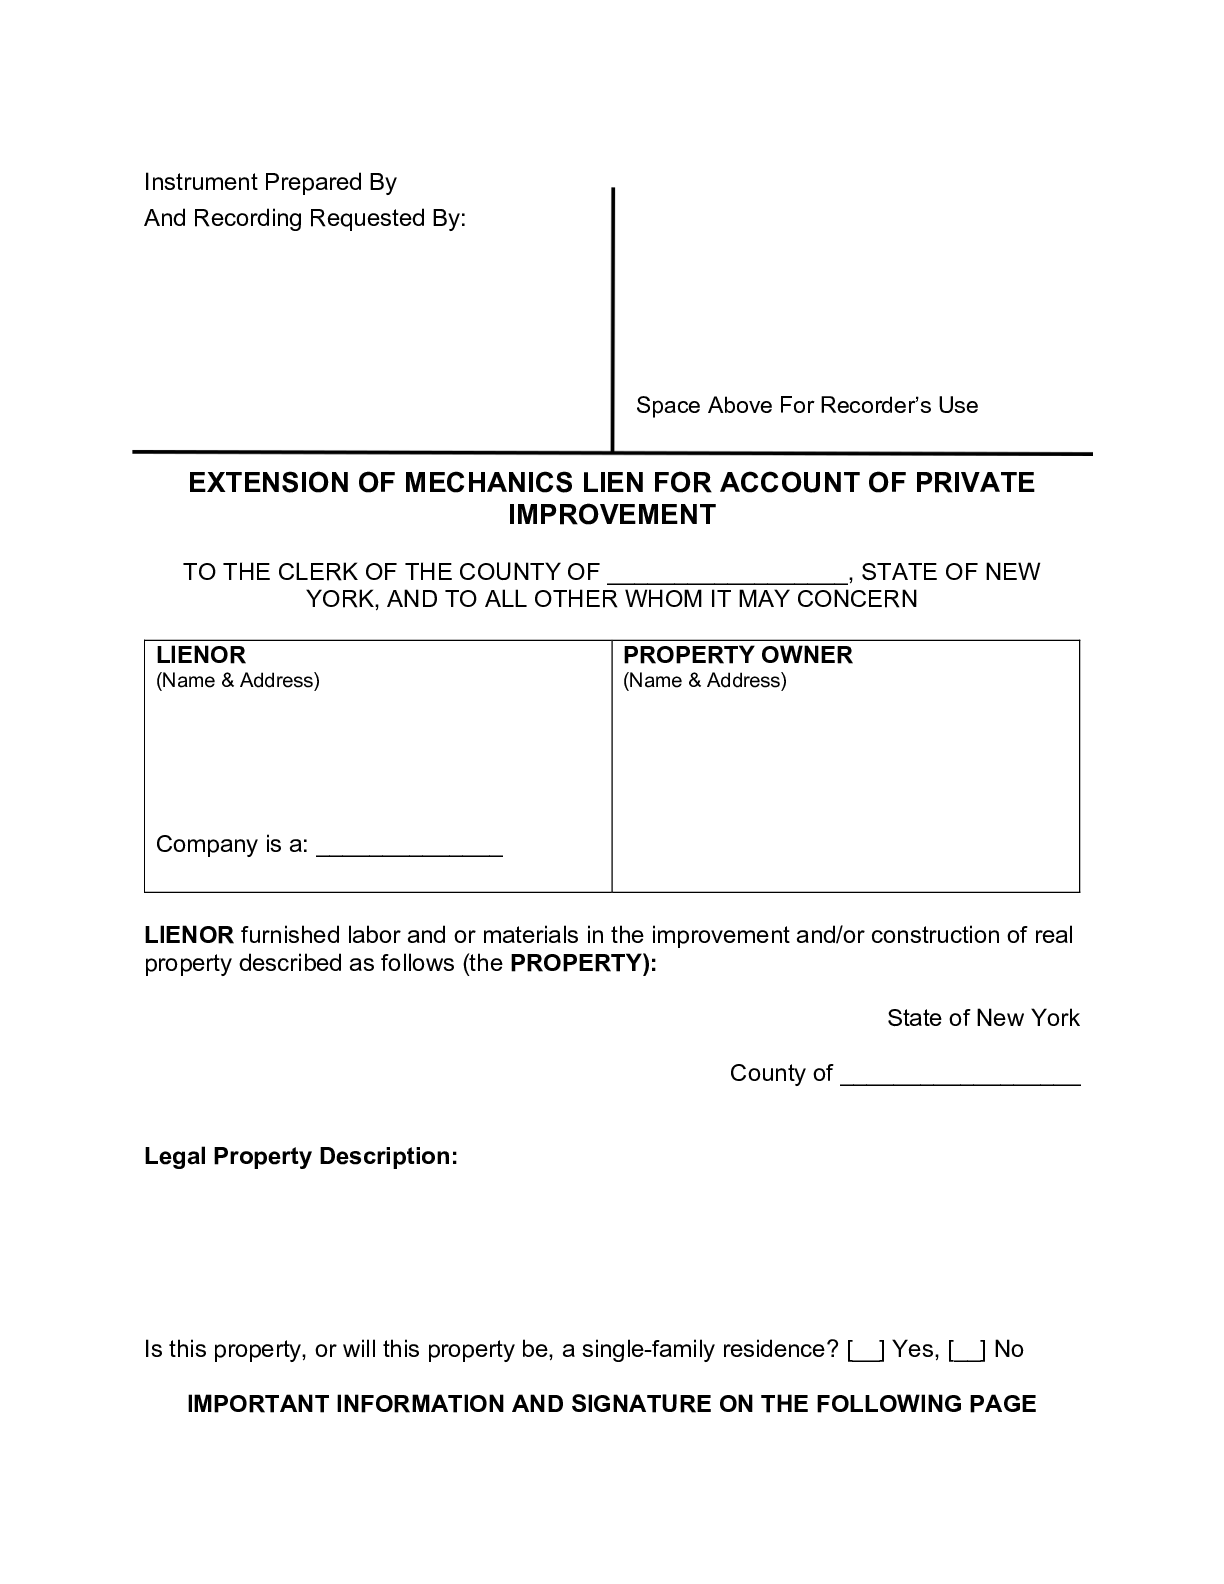 New York Extension for Mechanics Lien Form - free from